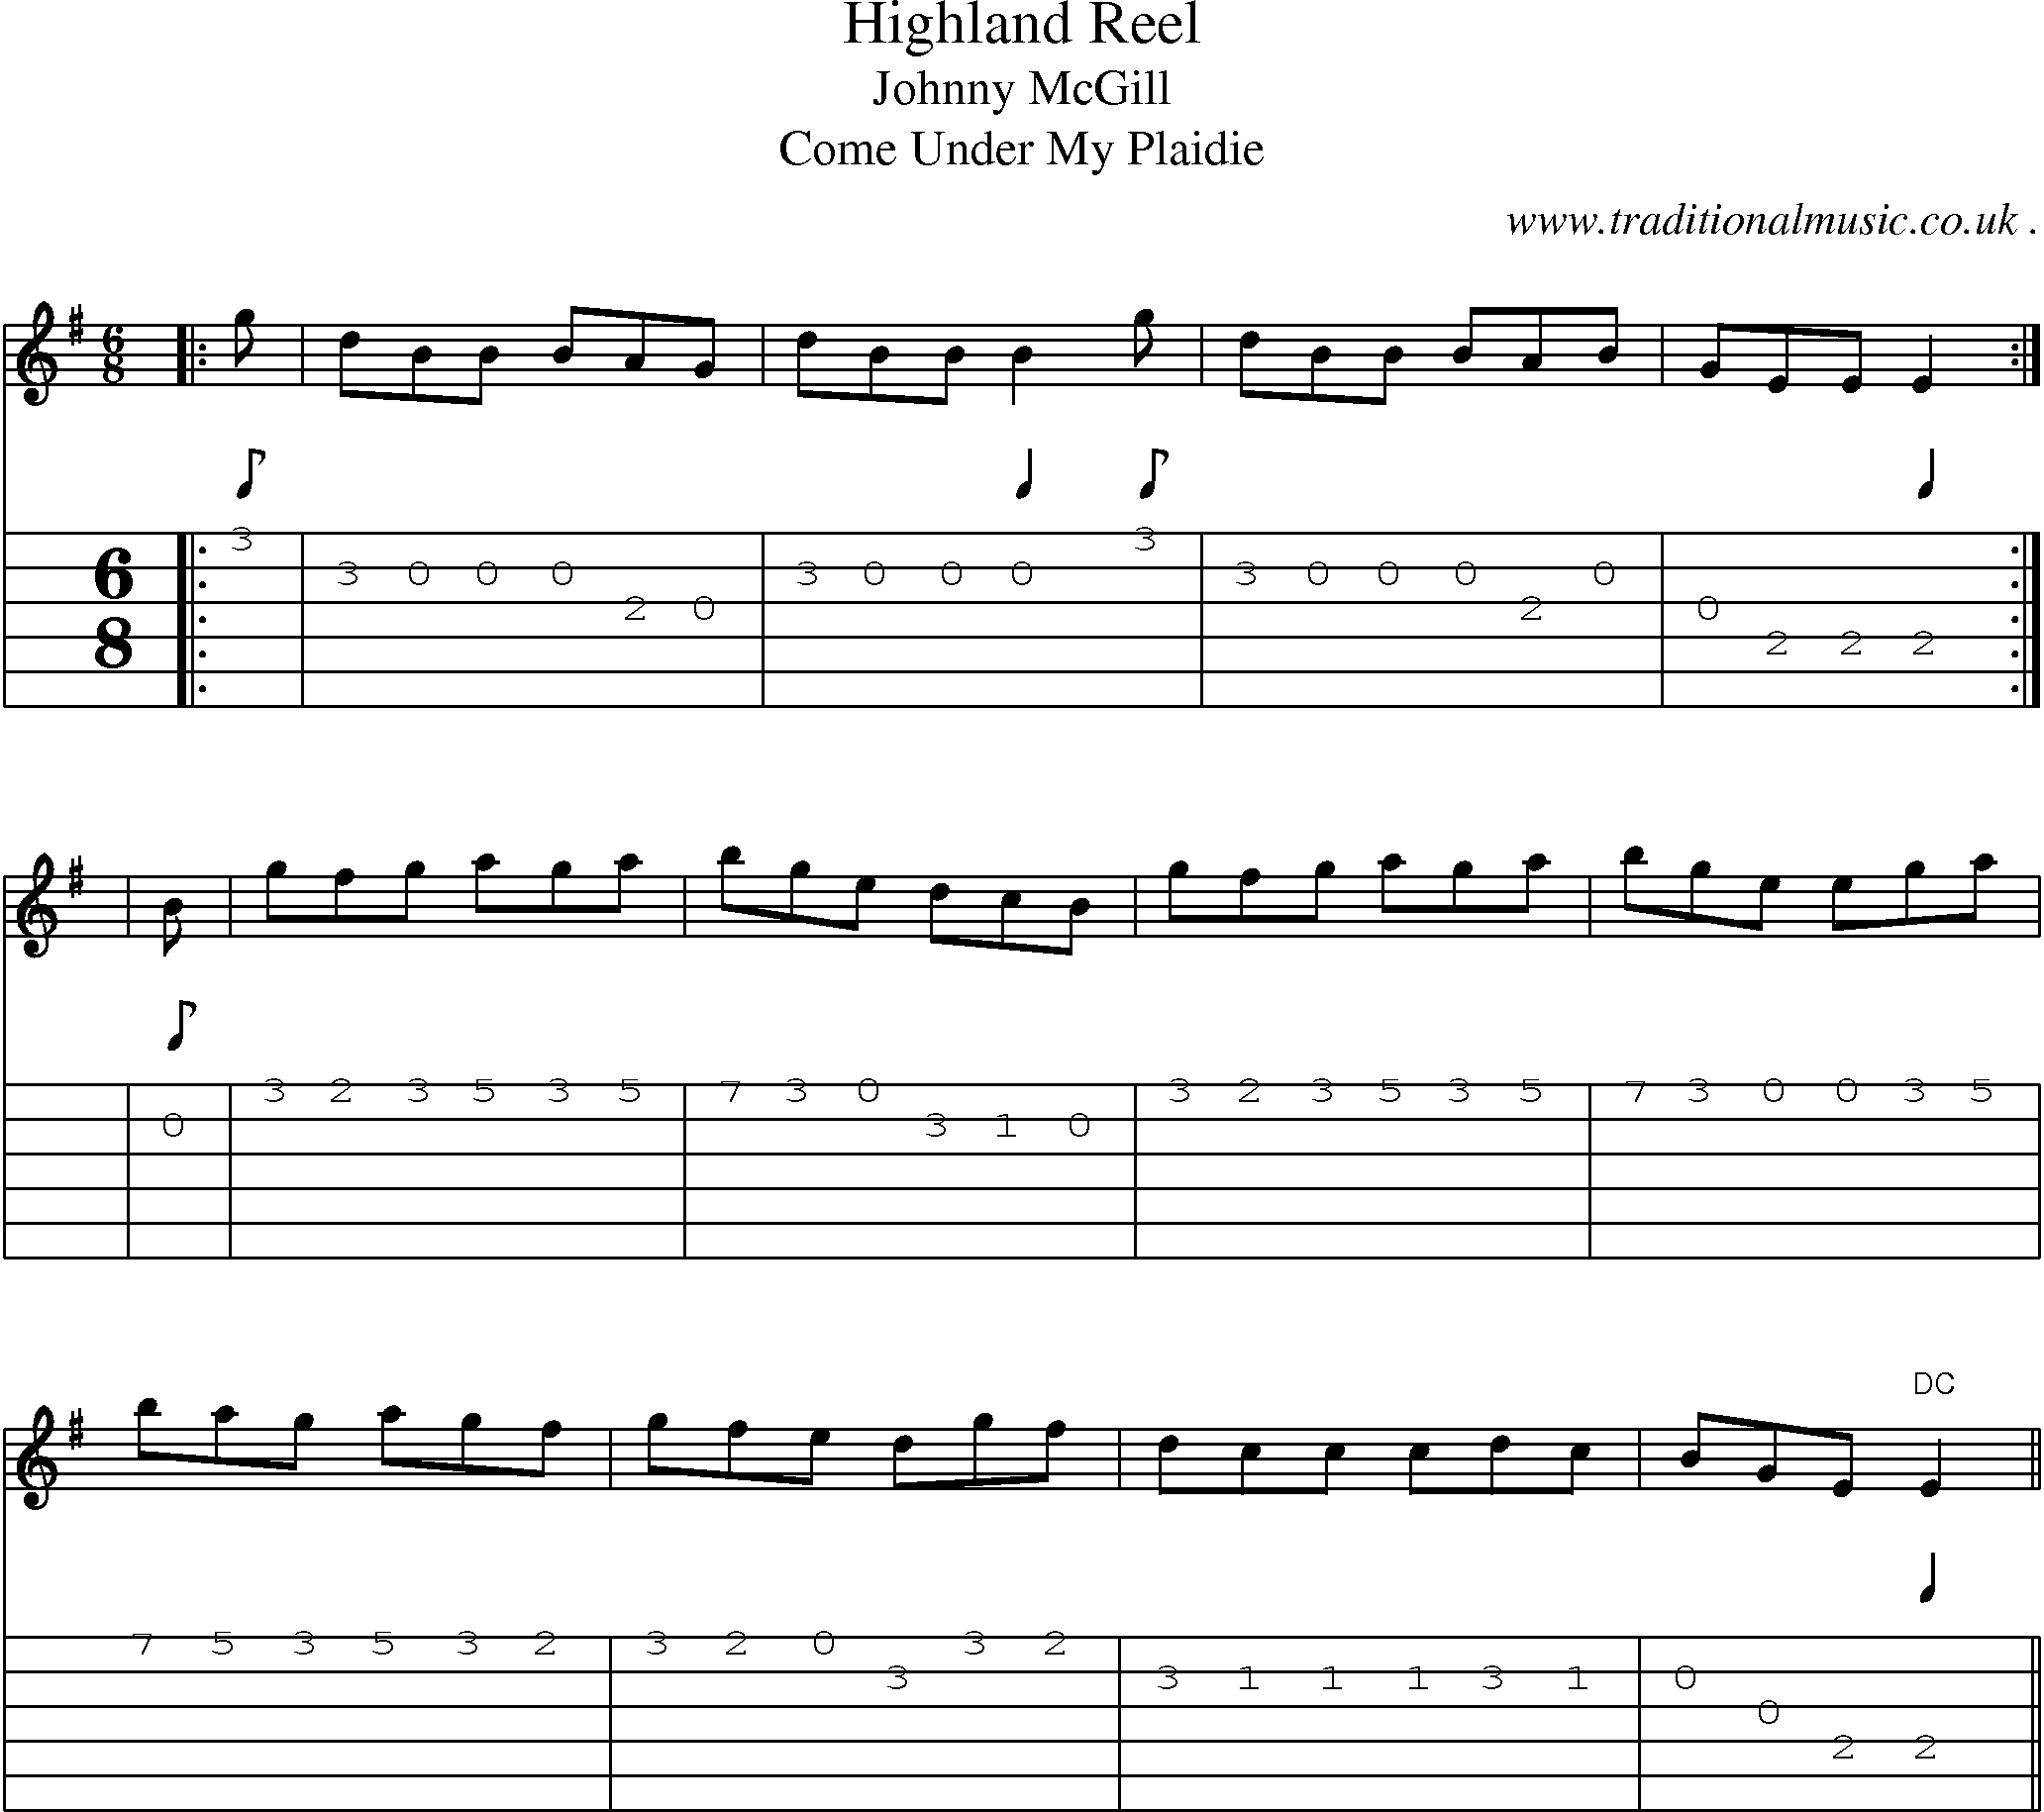 Sheet-Music and Guitar Tabs for Highland Reel